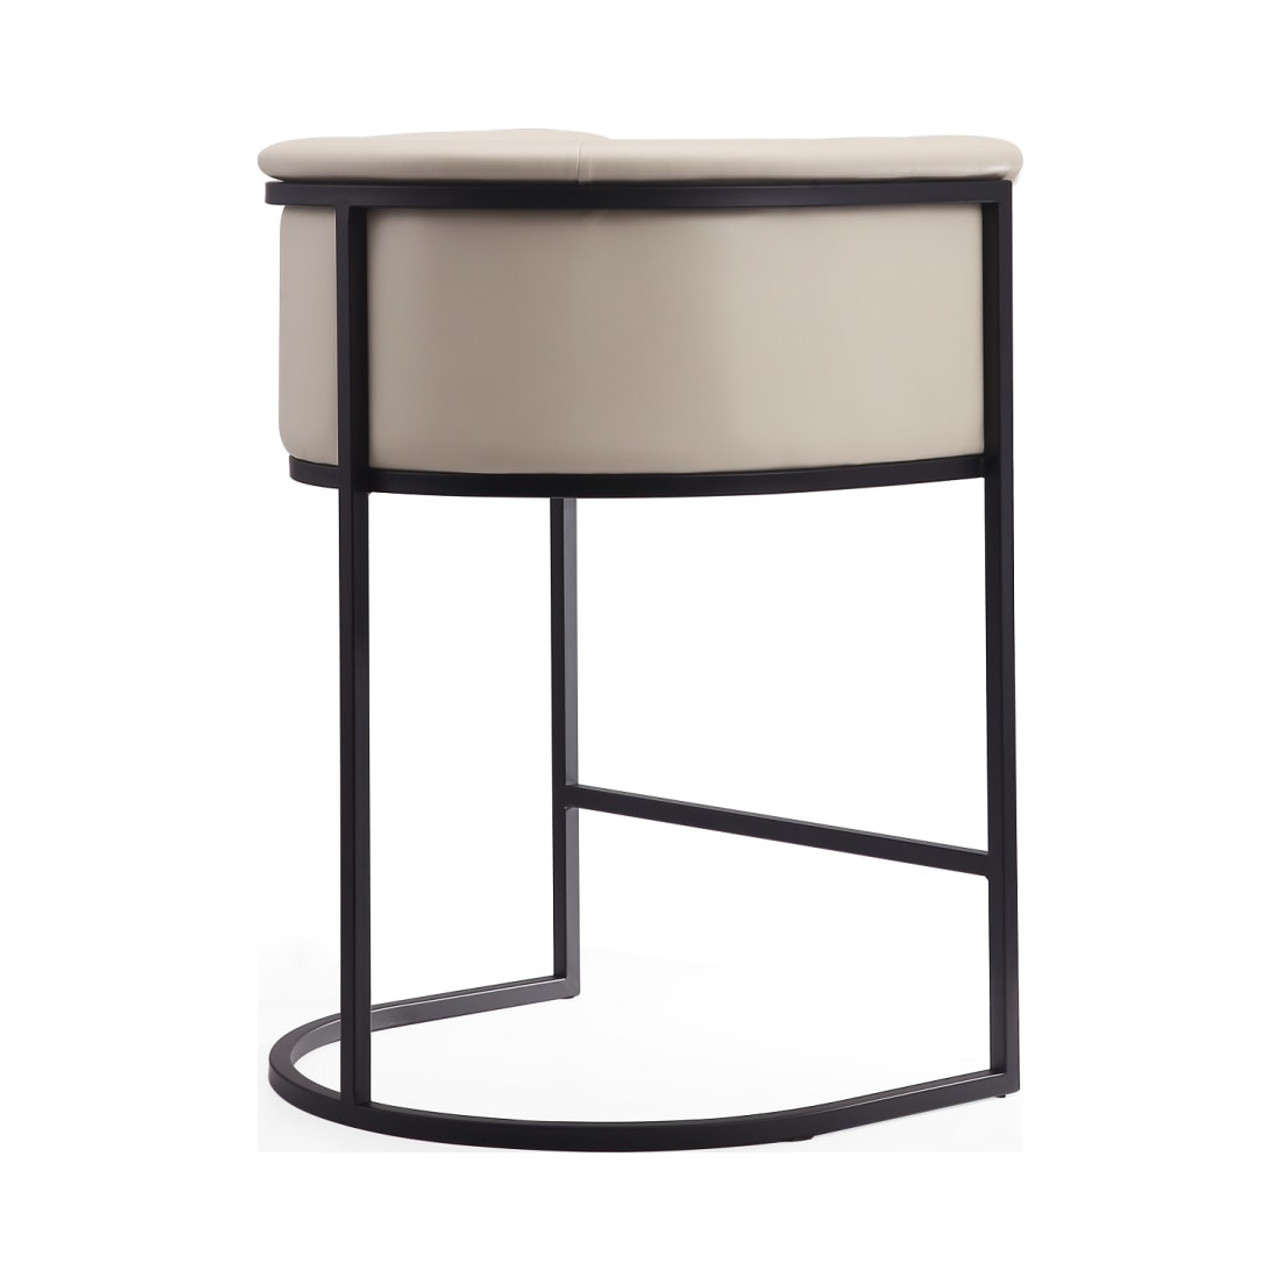 Cosmopolitan Counter Stool in Cream and Black (Set of 2)